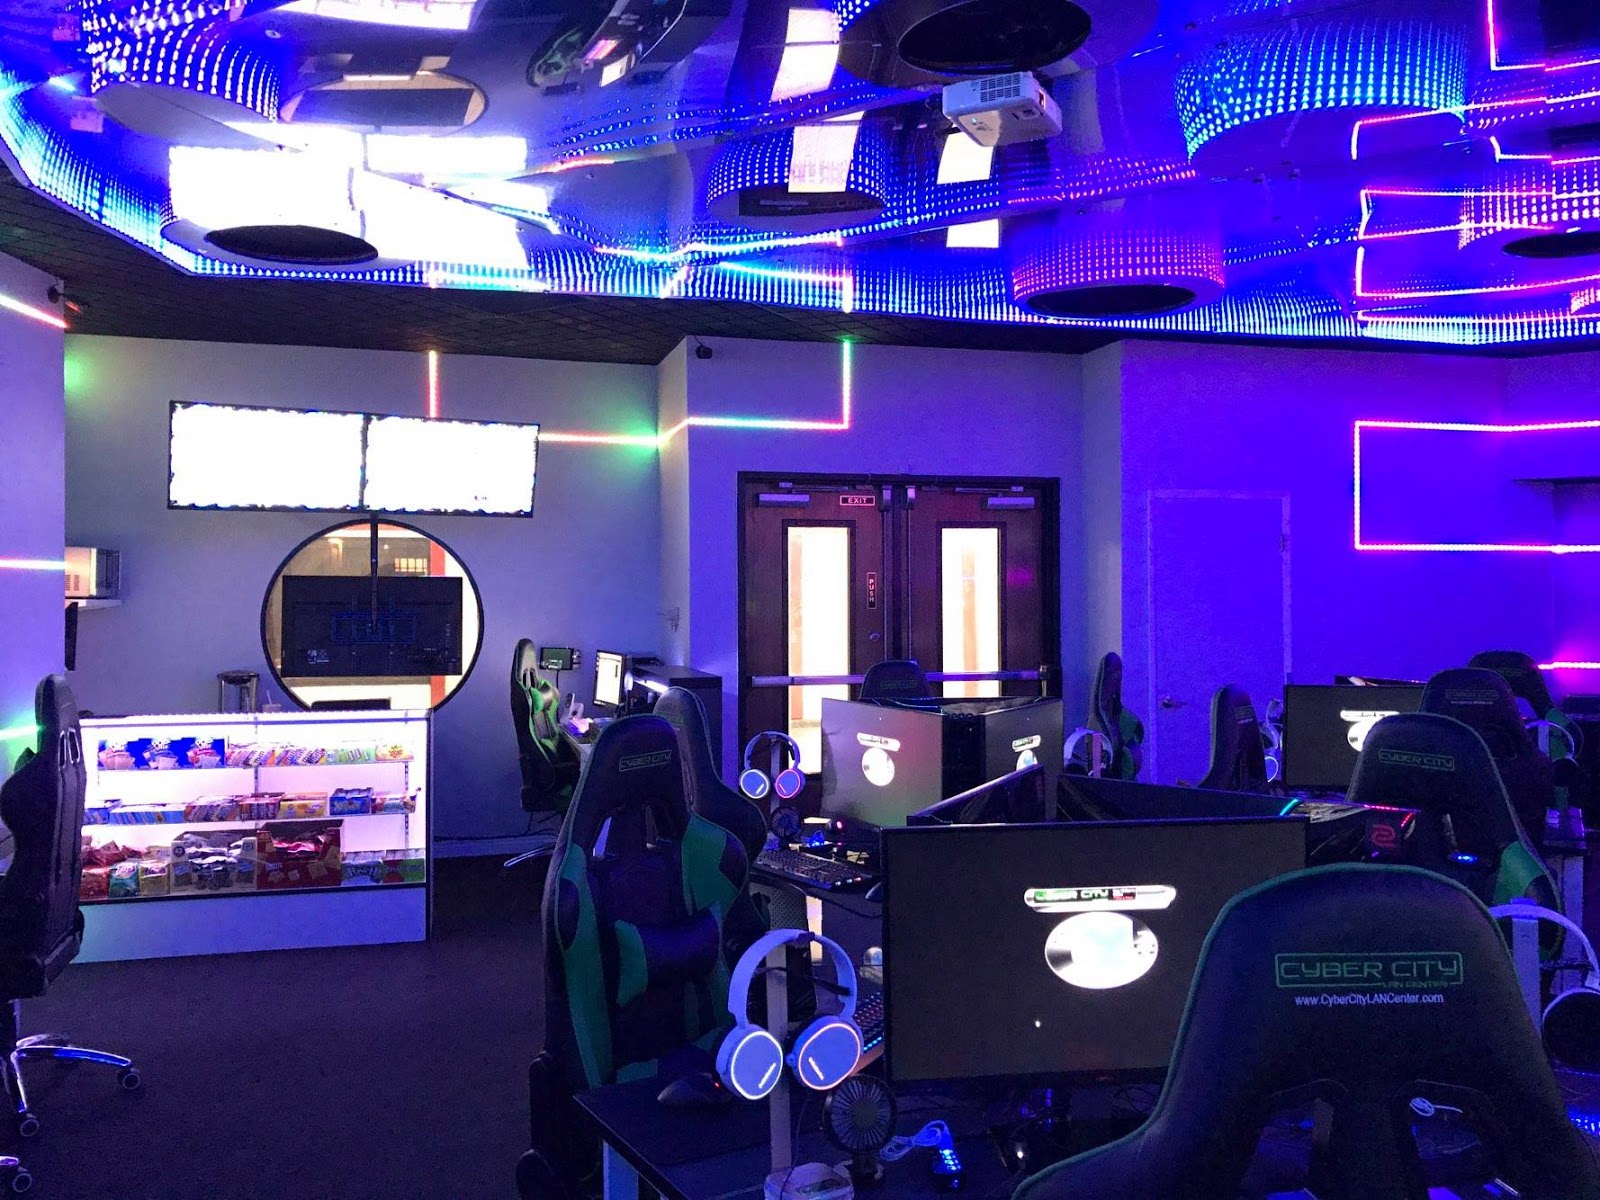 Things To Do In Los Angeles: Cyber City Lan Center Opened In Little Tokyo